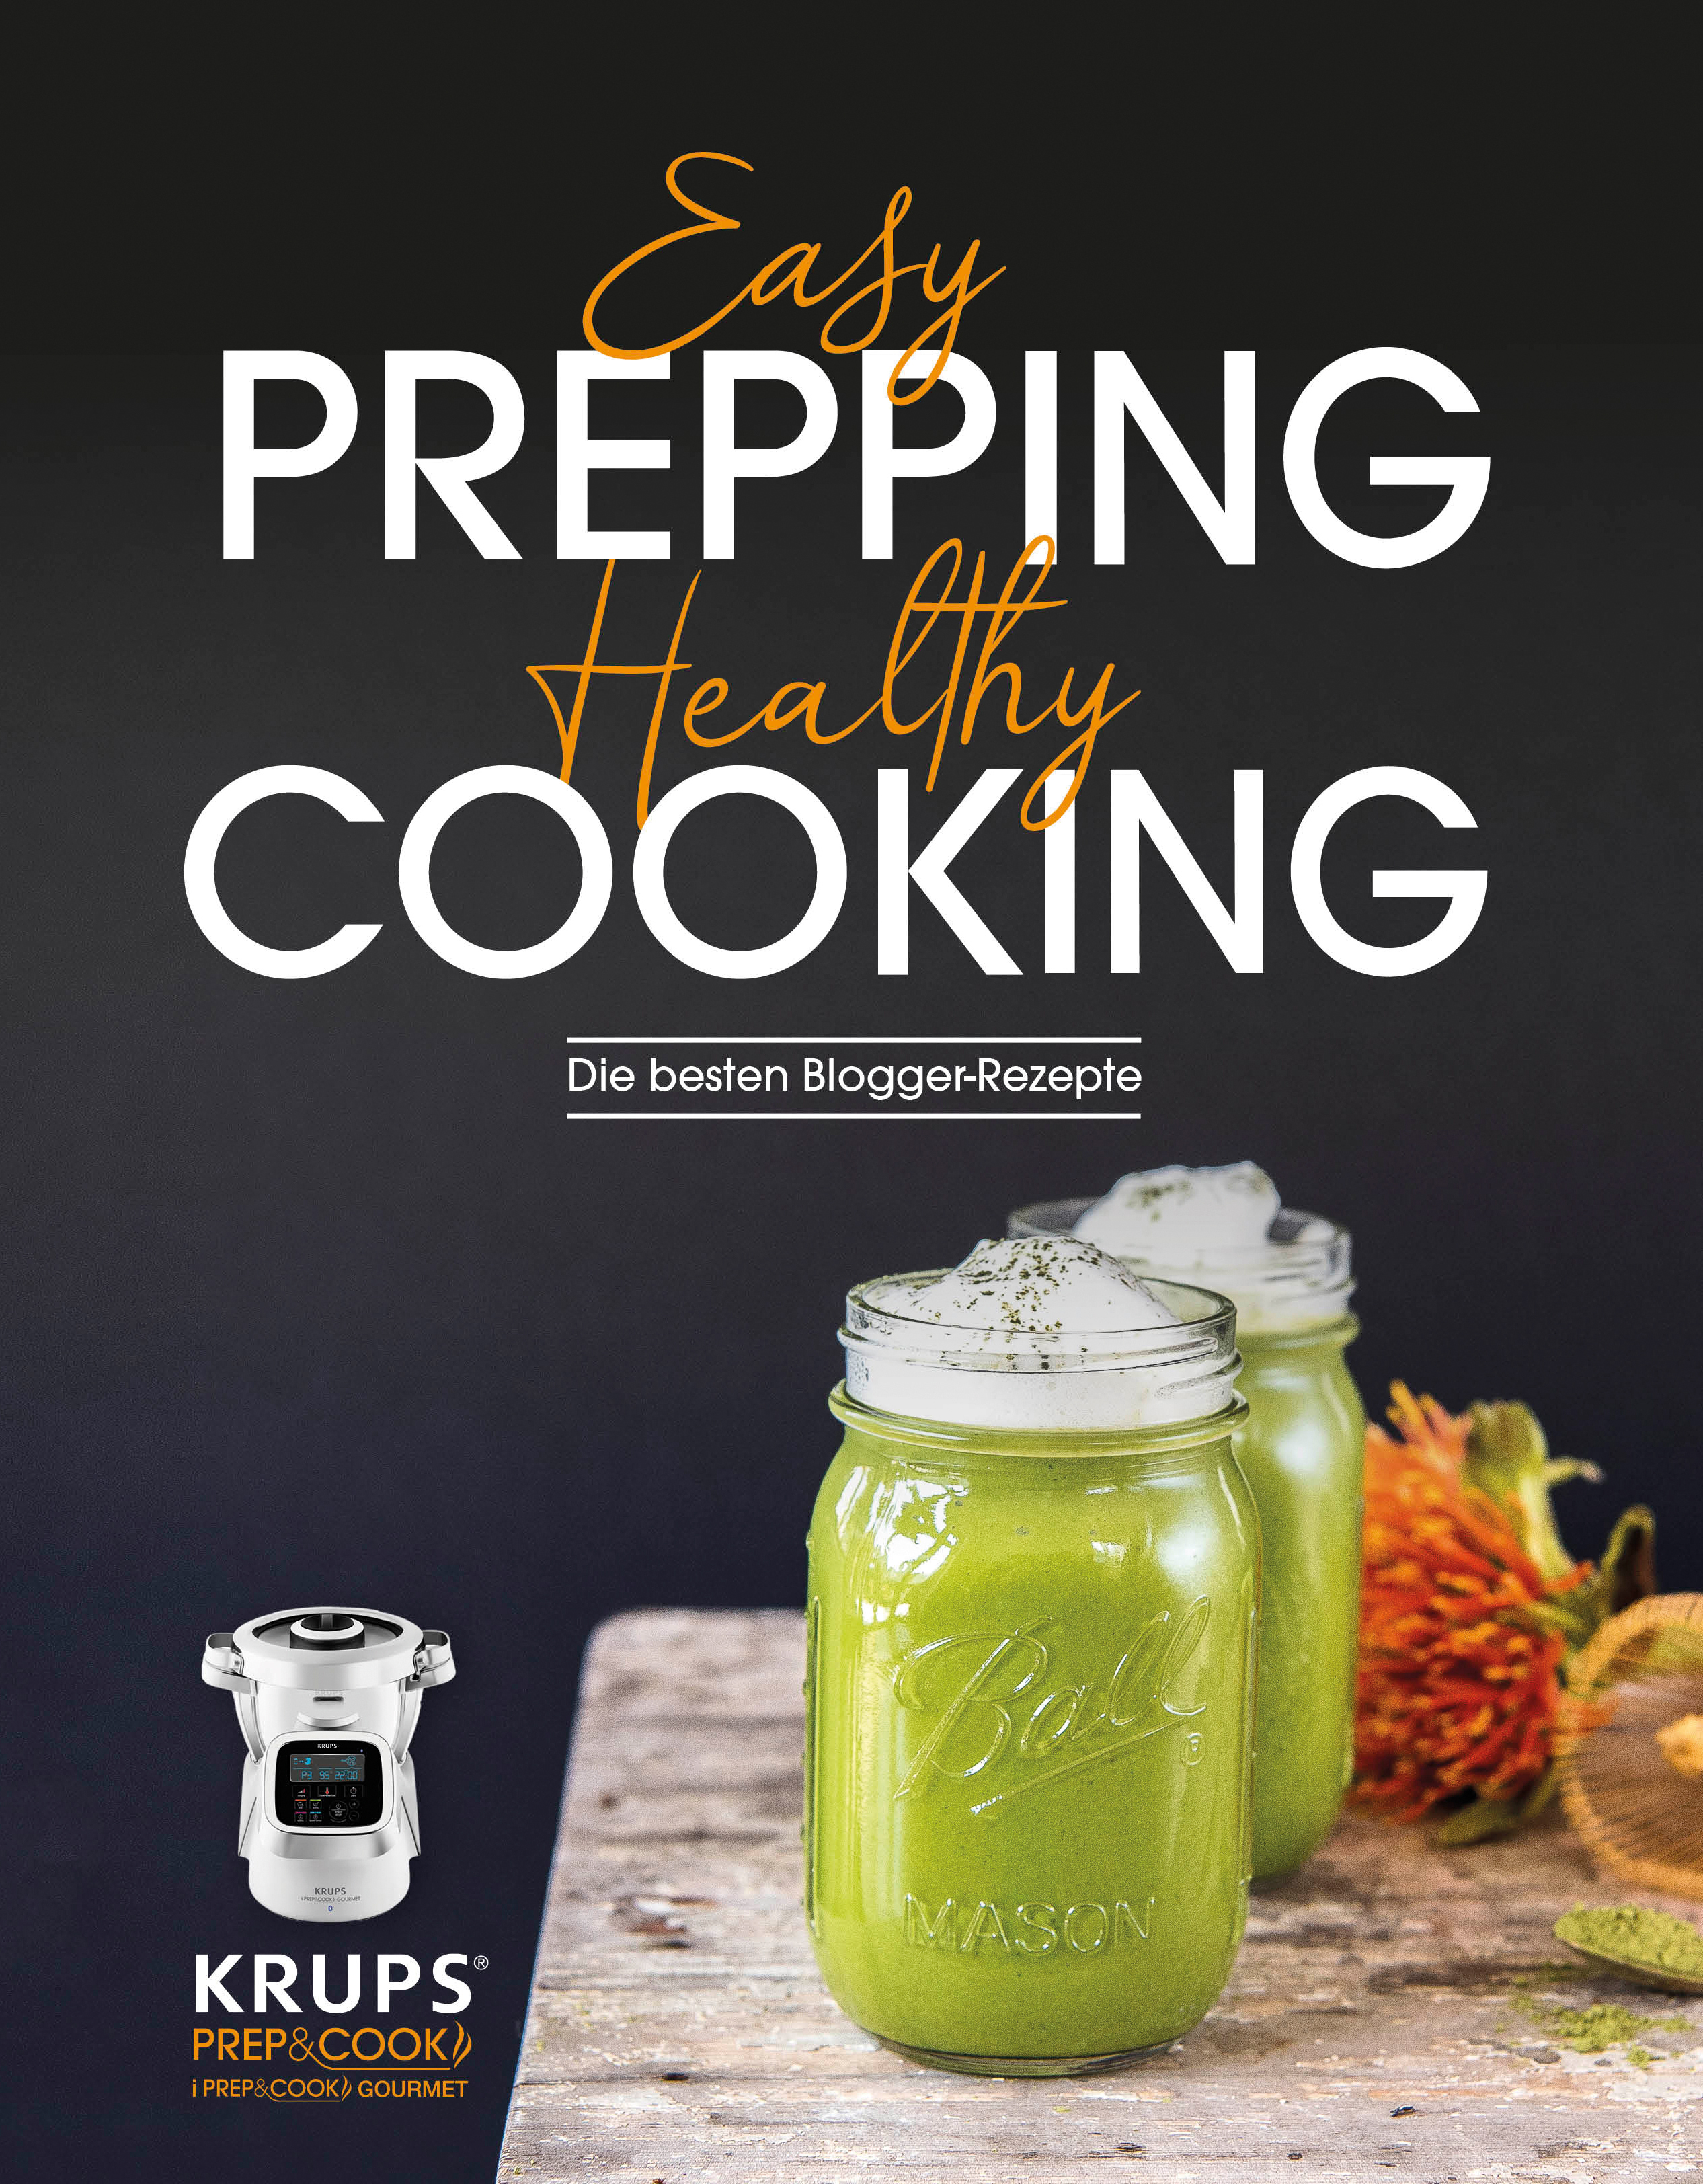 KRUPS HP1234.01 Prep&Cook Blogger Healthy Easy Cooking Prepping, Kochbuch